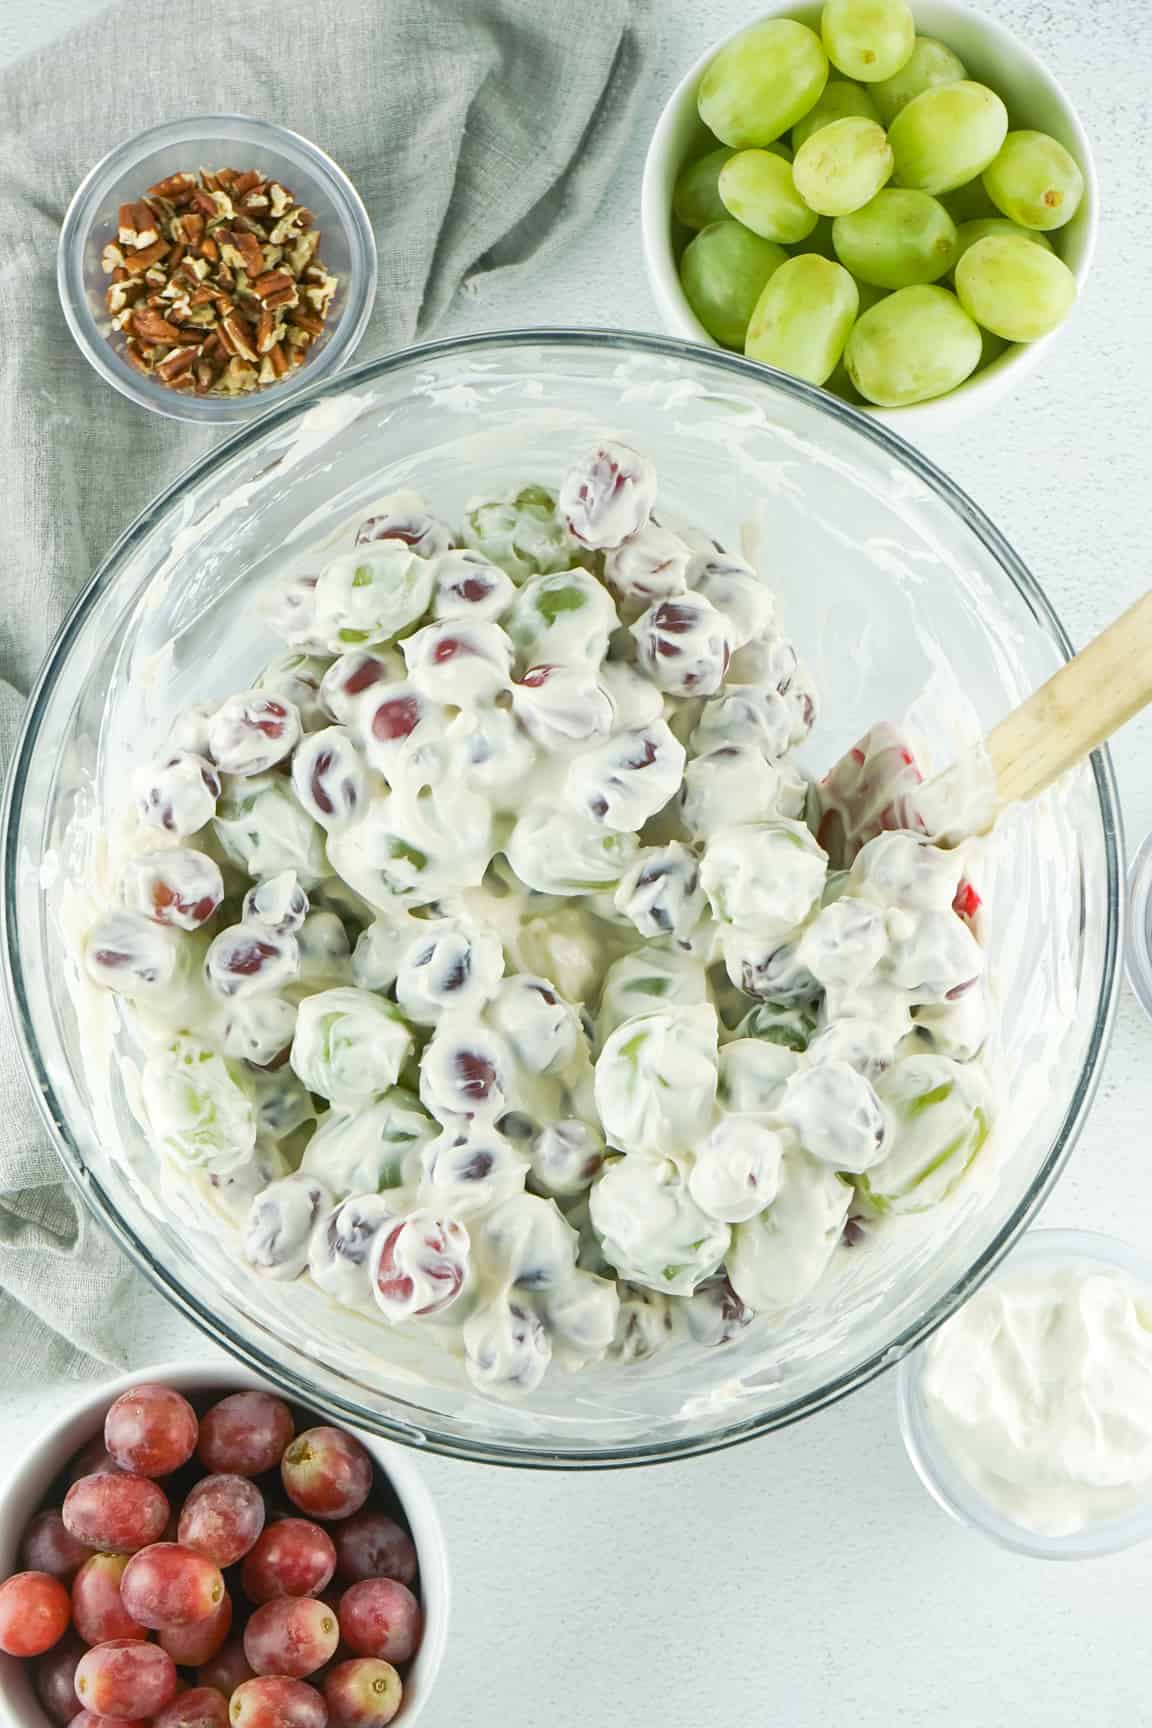 Grapes folded into cream cheese mixture.